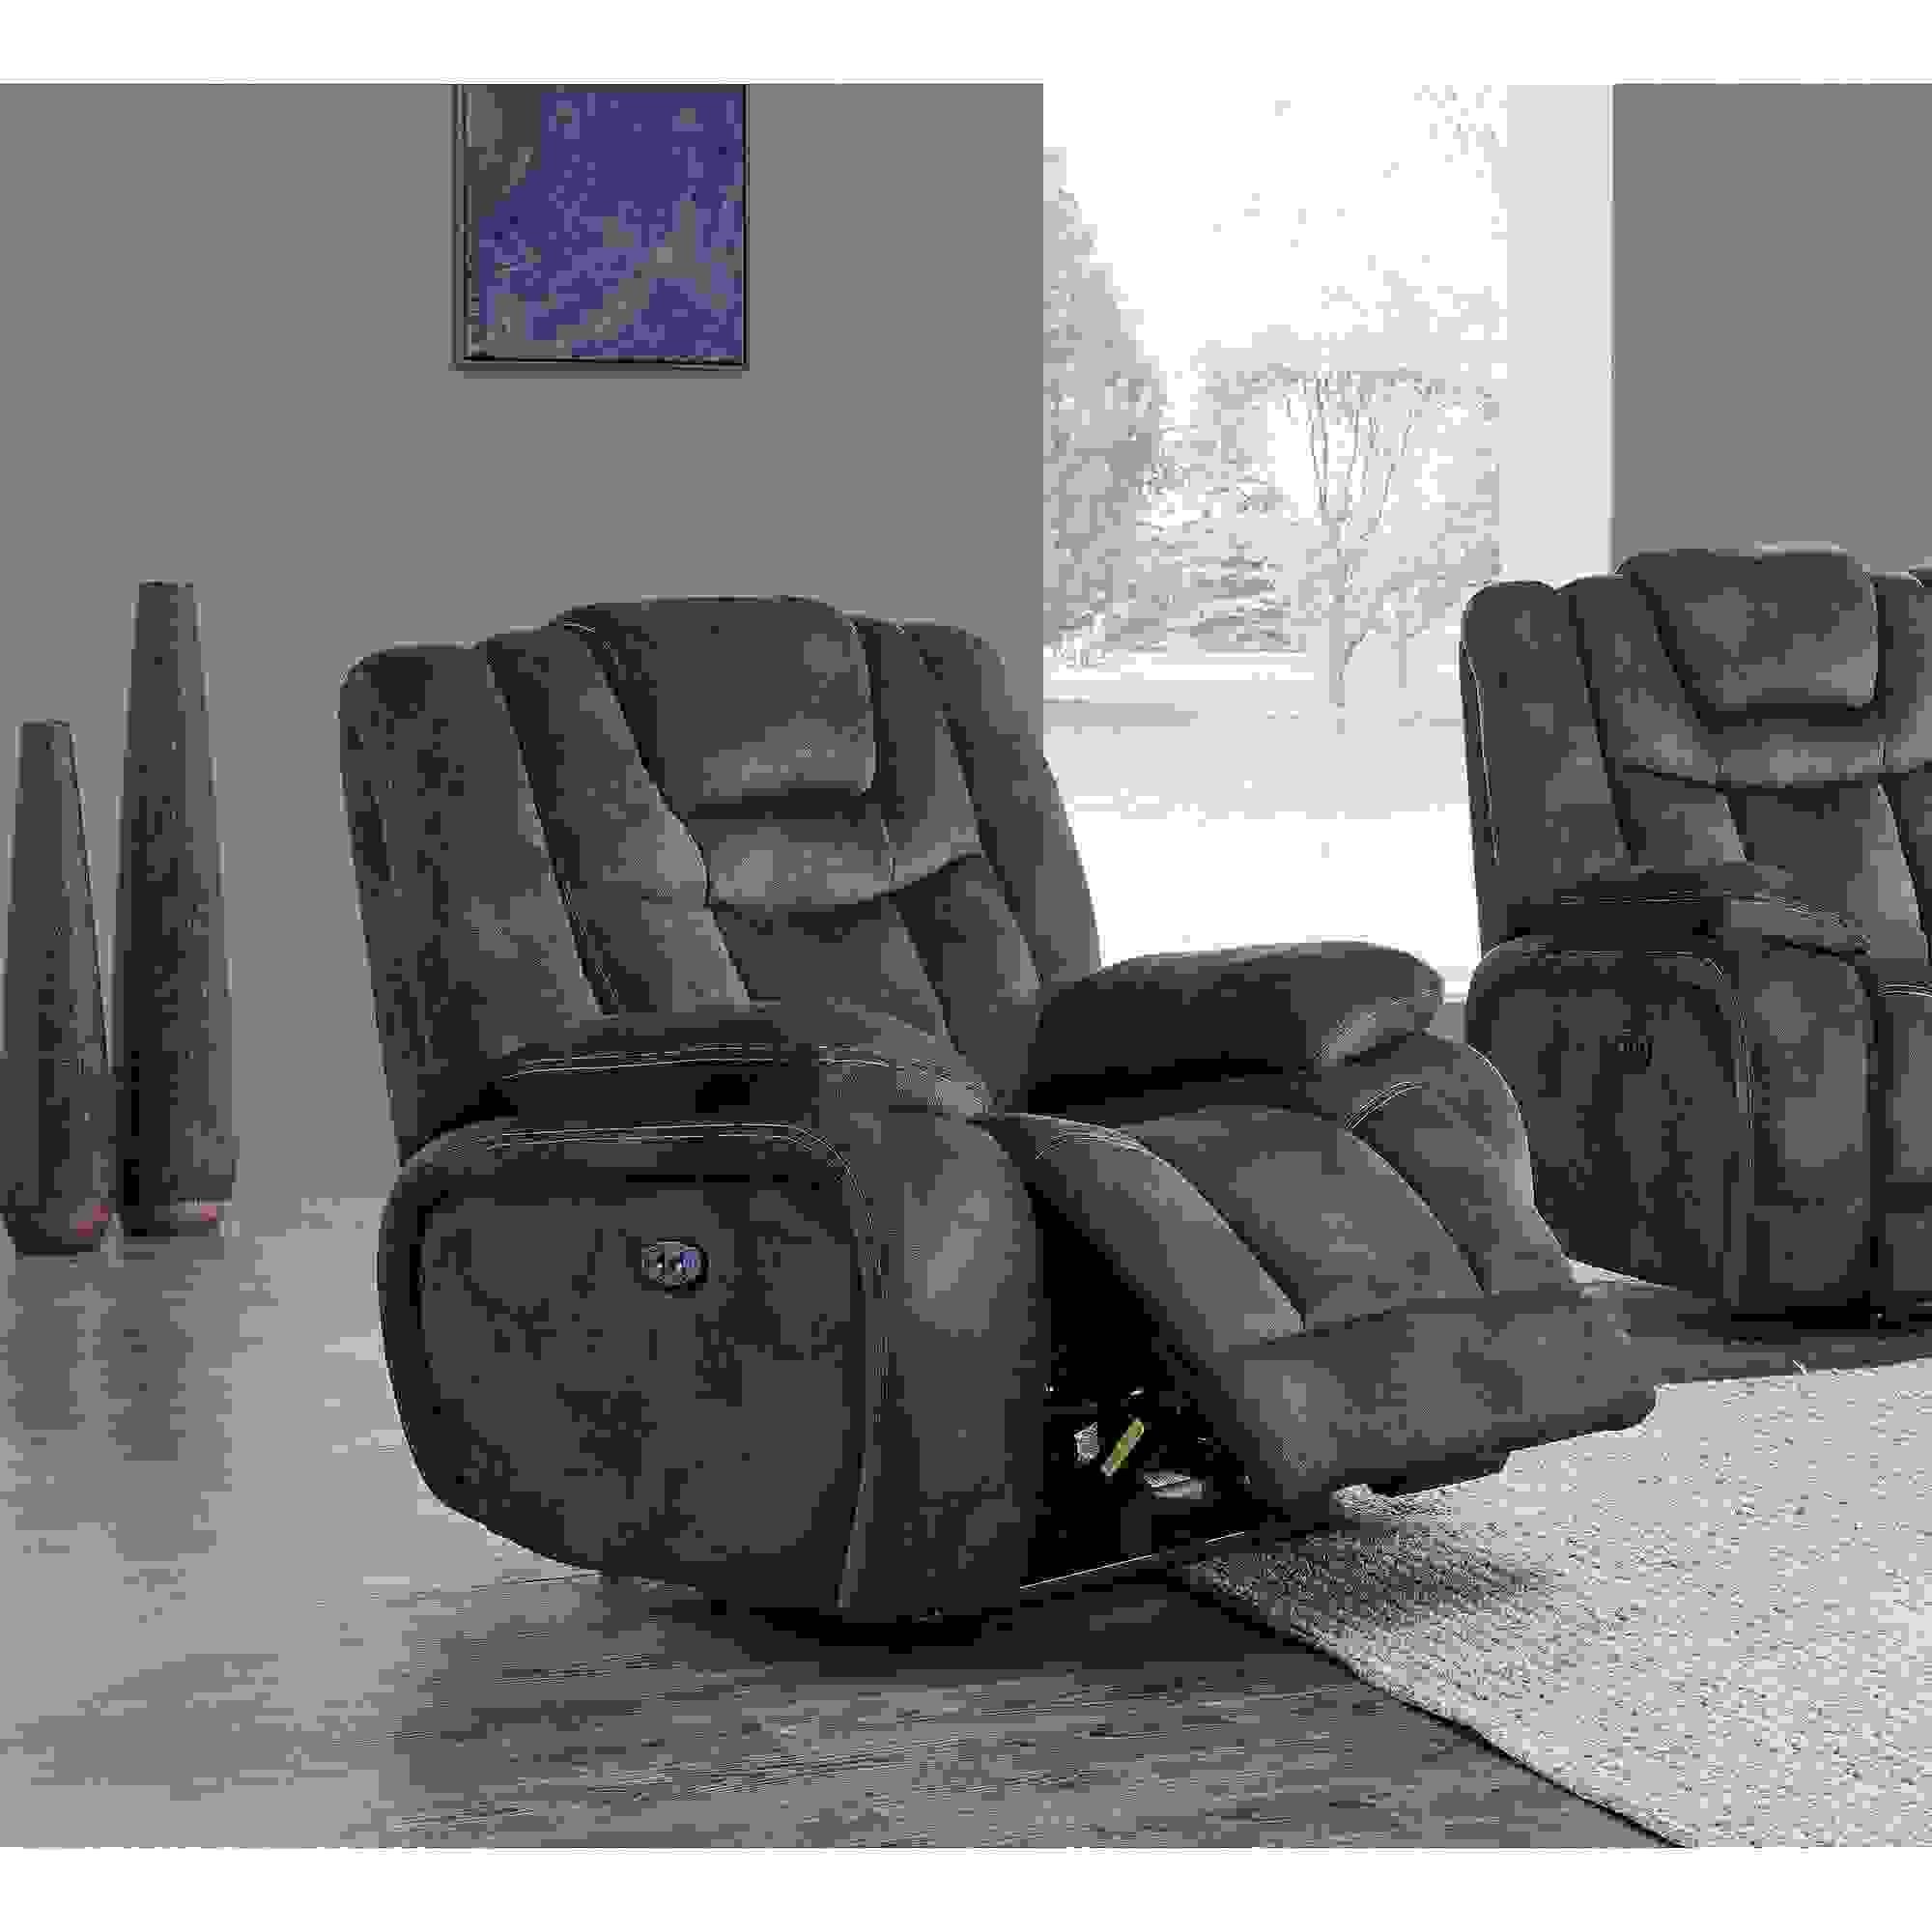 Chocolate Power Glider Recliner with Adjustable Power Headrest and USB Port